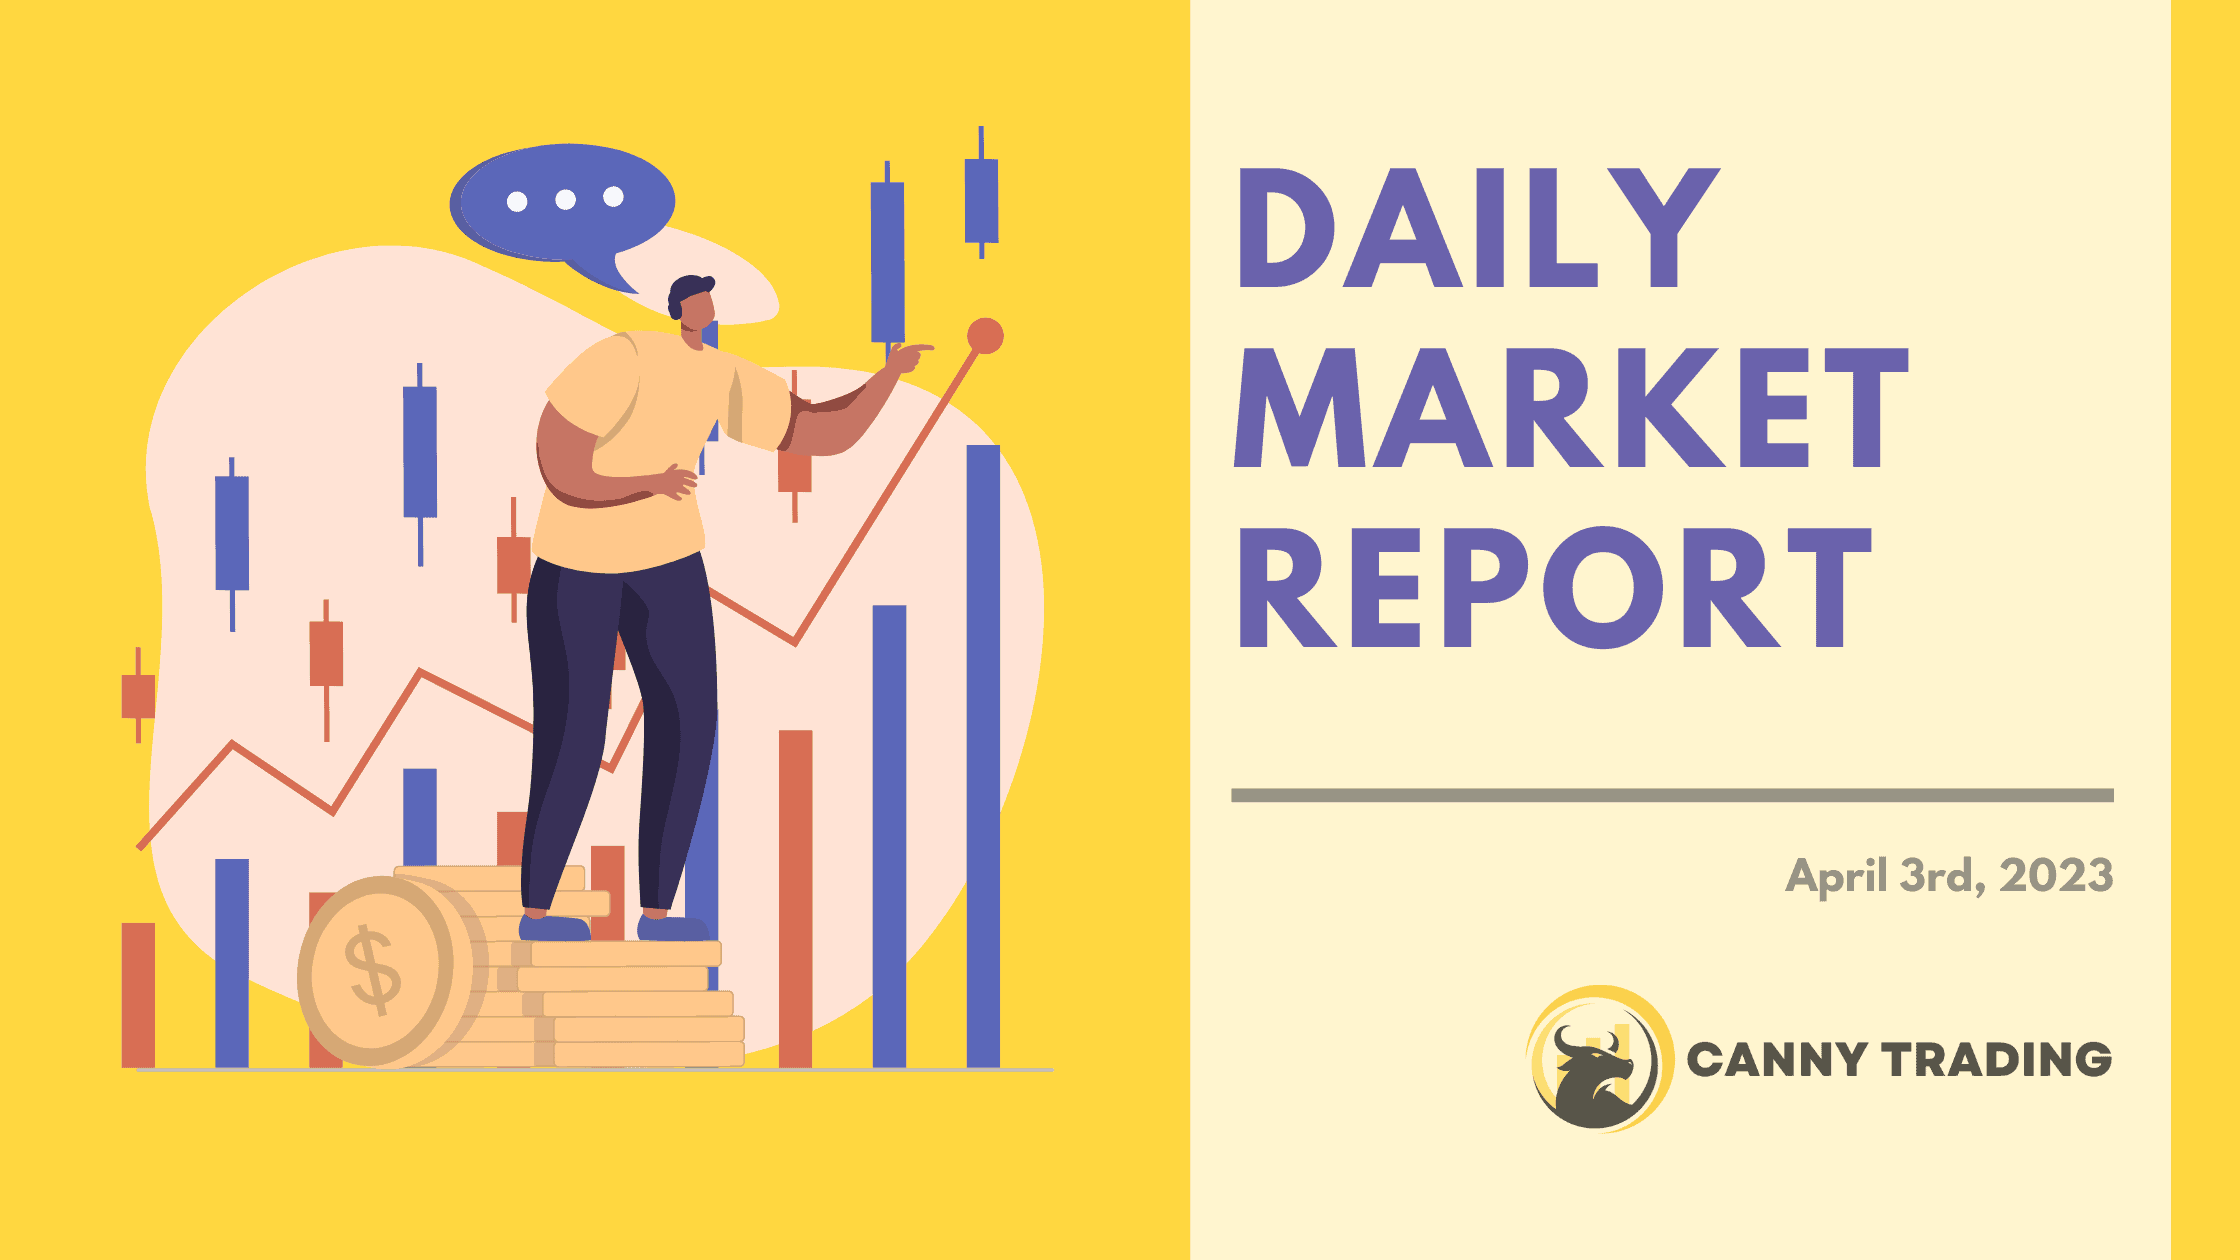 Daily Market Report April 3, 2023